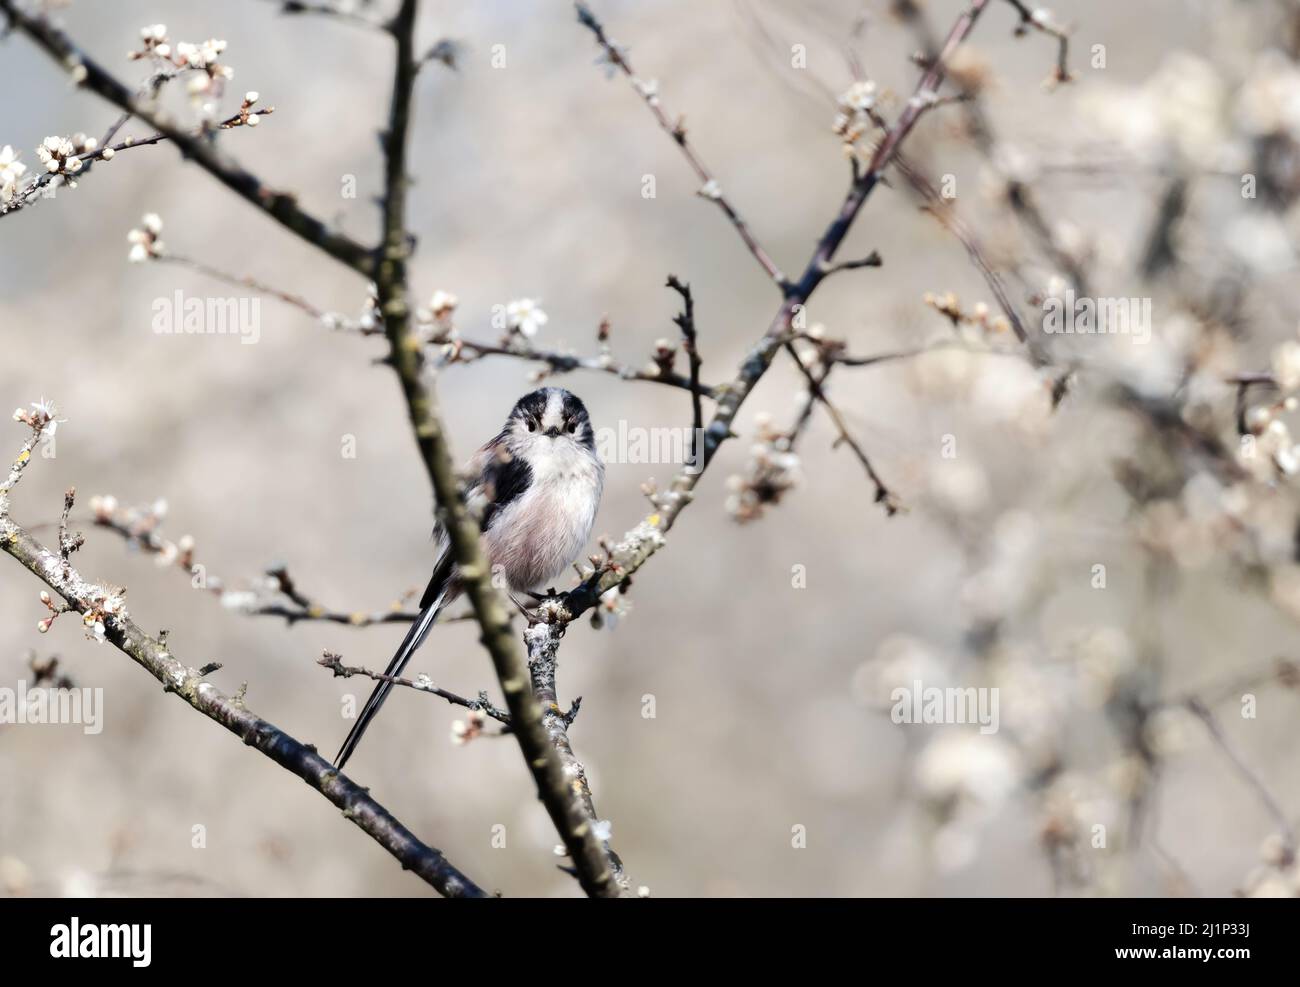 Long tailed tit perched on branch with blossoms in spring, England. Stock Photo